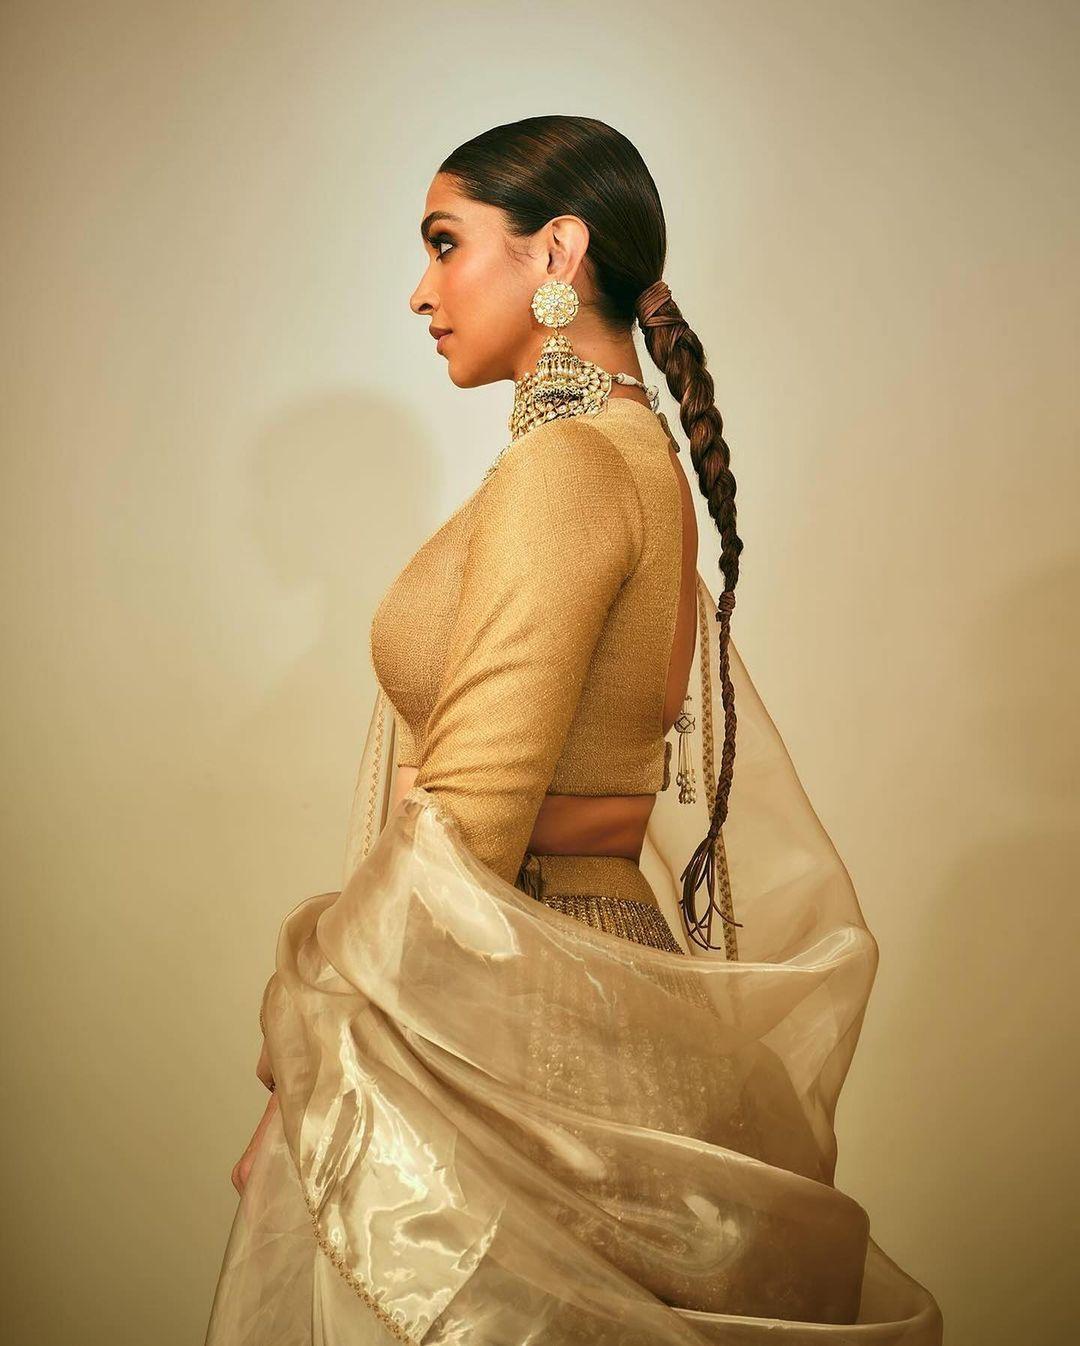 She paired it with a black and golden skirt adorned with intricate craftsmanship, and a plain golden silk dupatta completed her royal queen-like appearance.